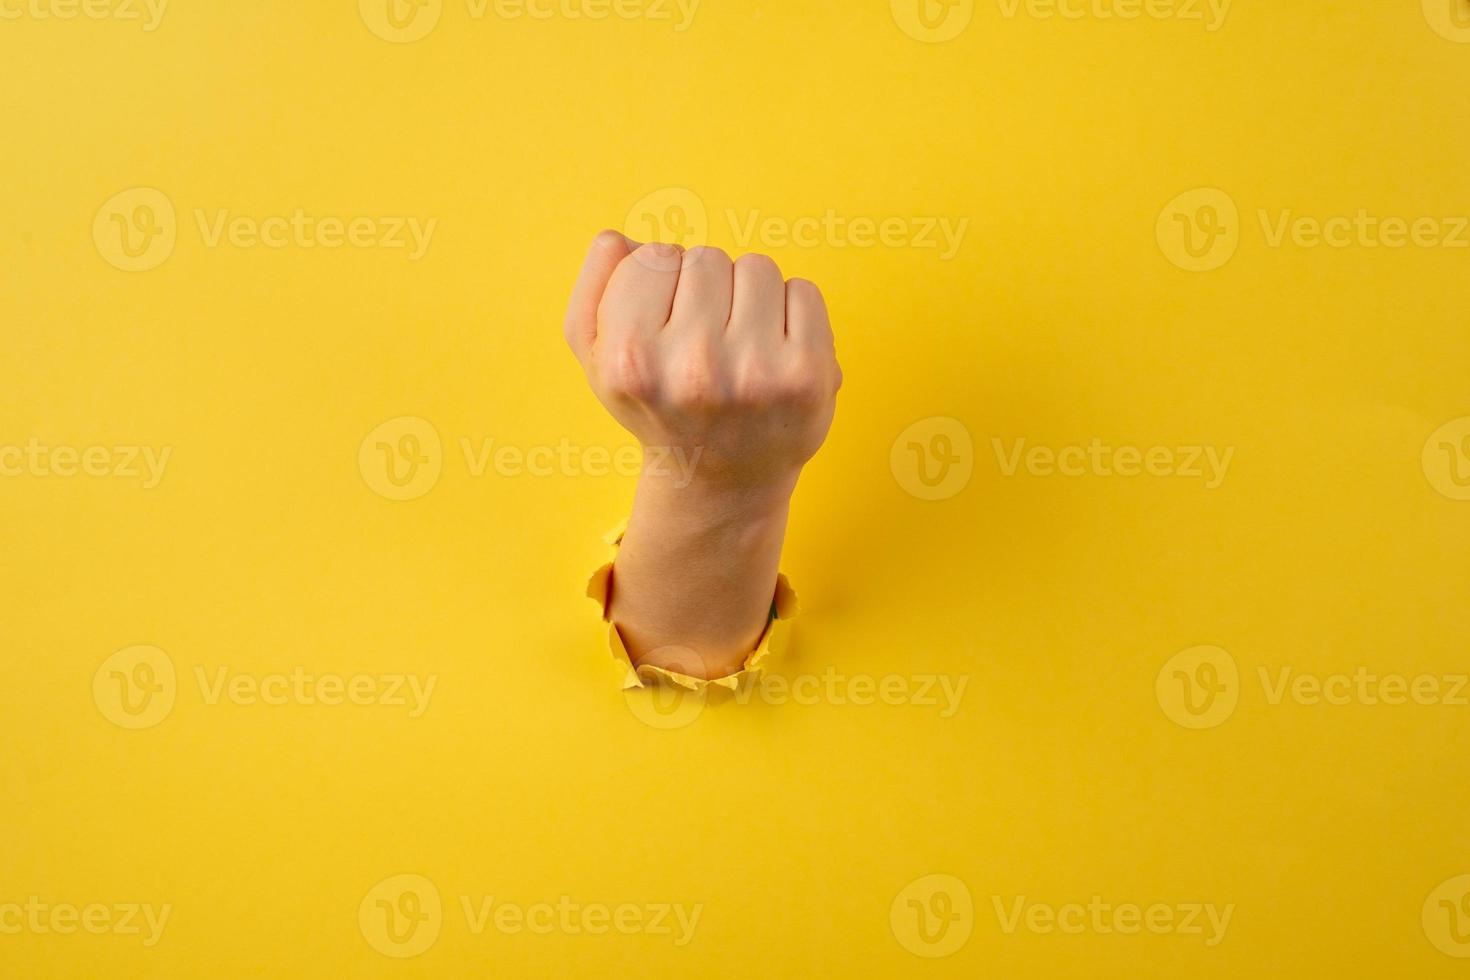 Man showing his fist from the bursted hole on orange cardboard background photo